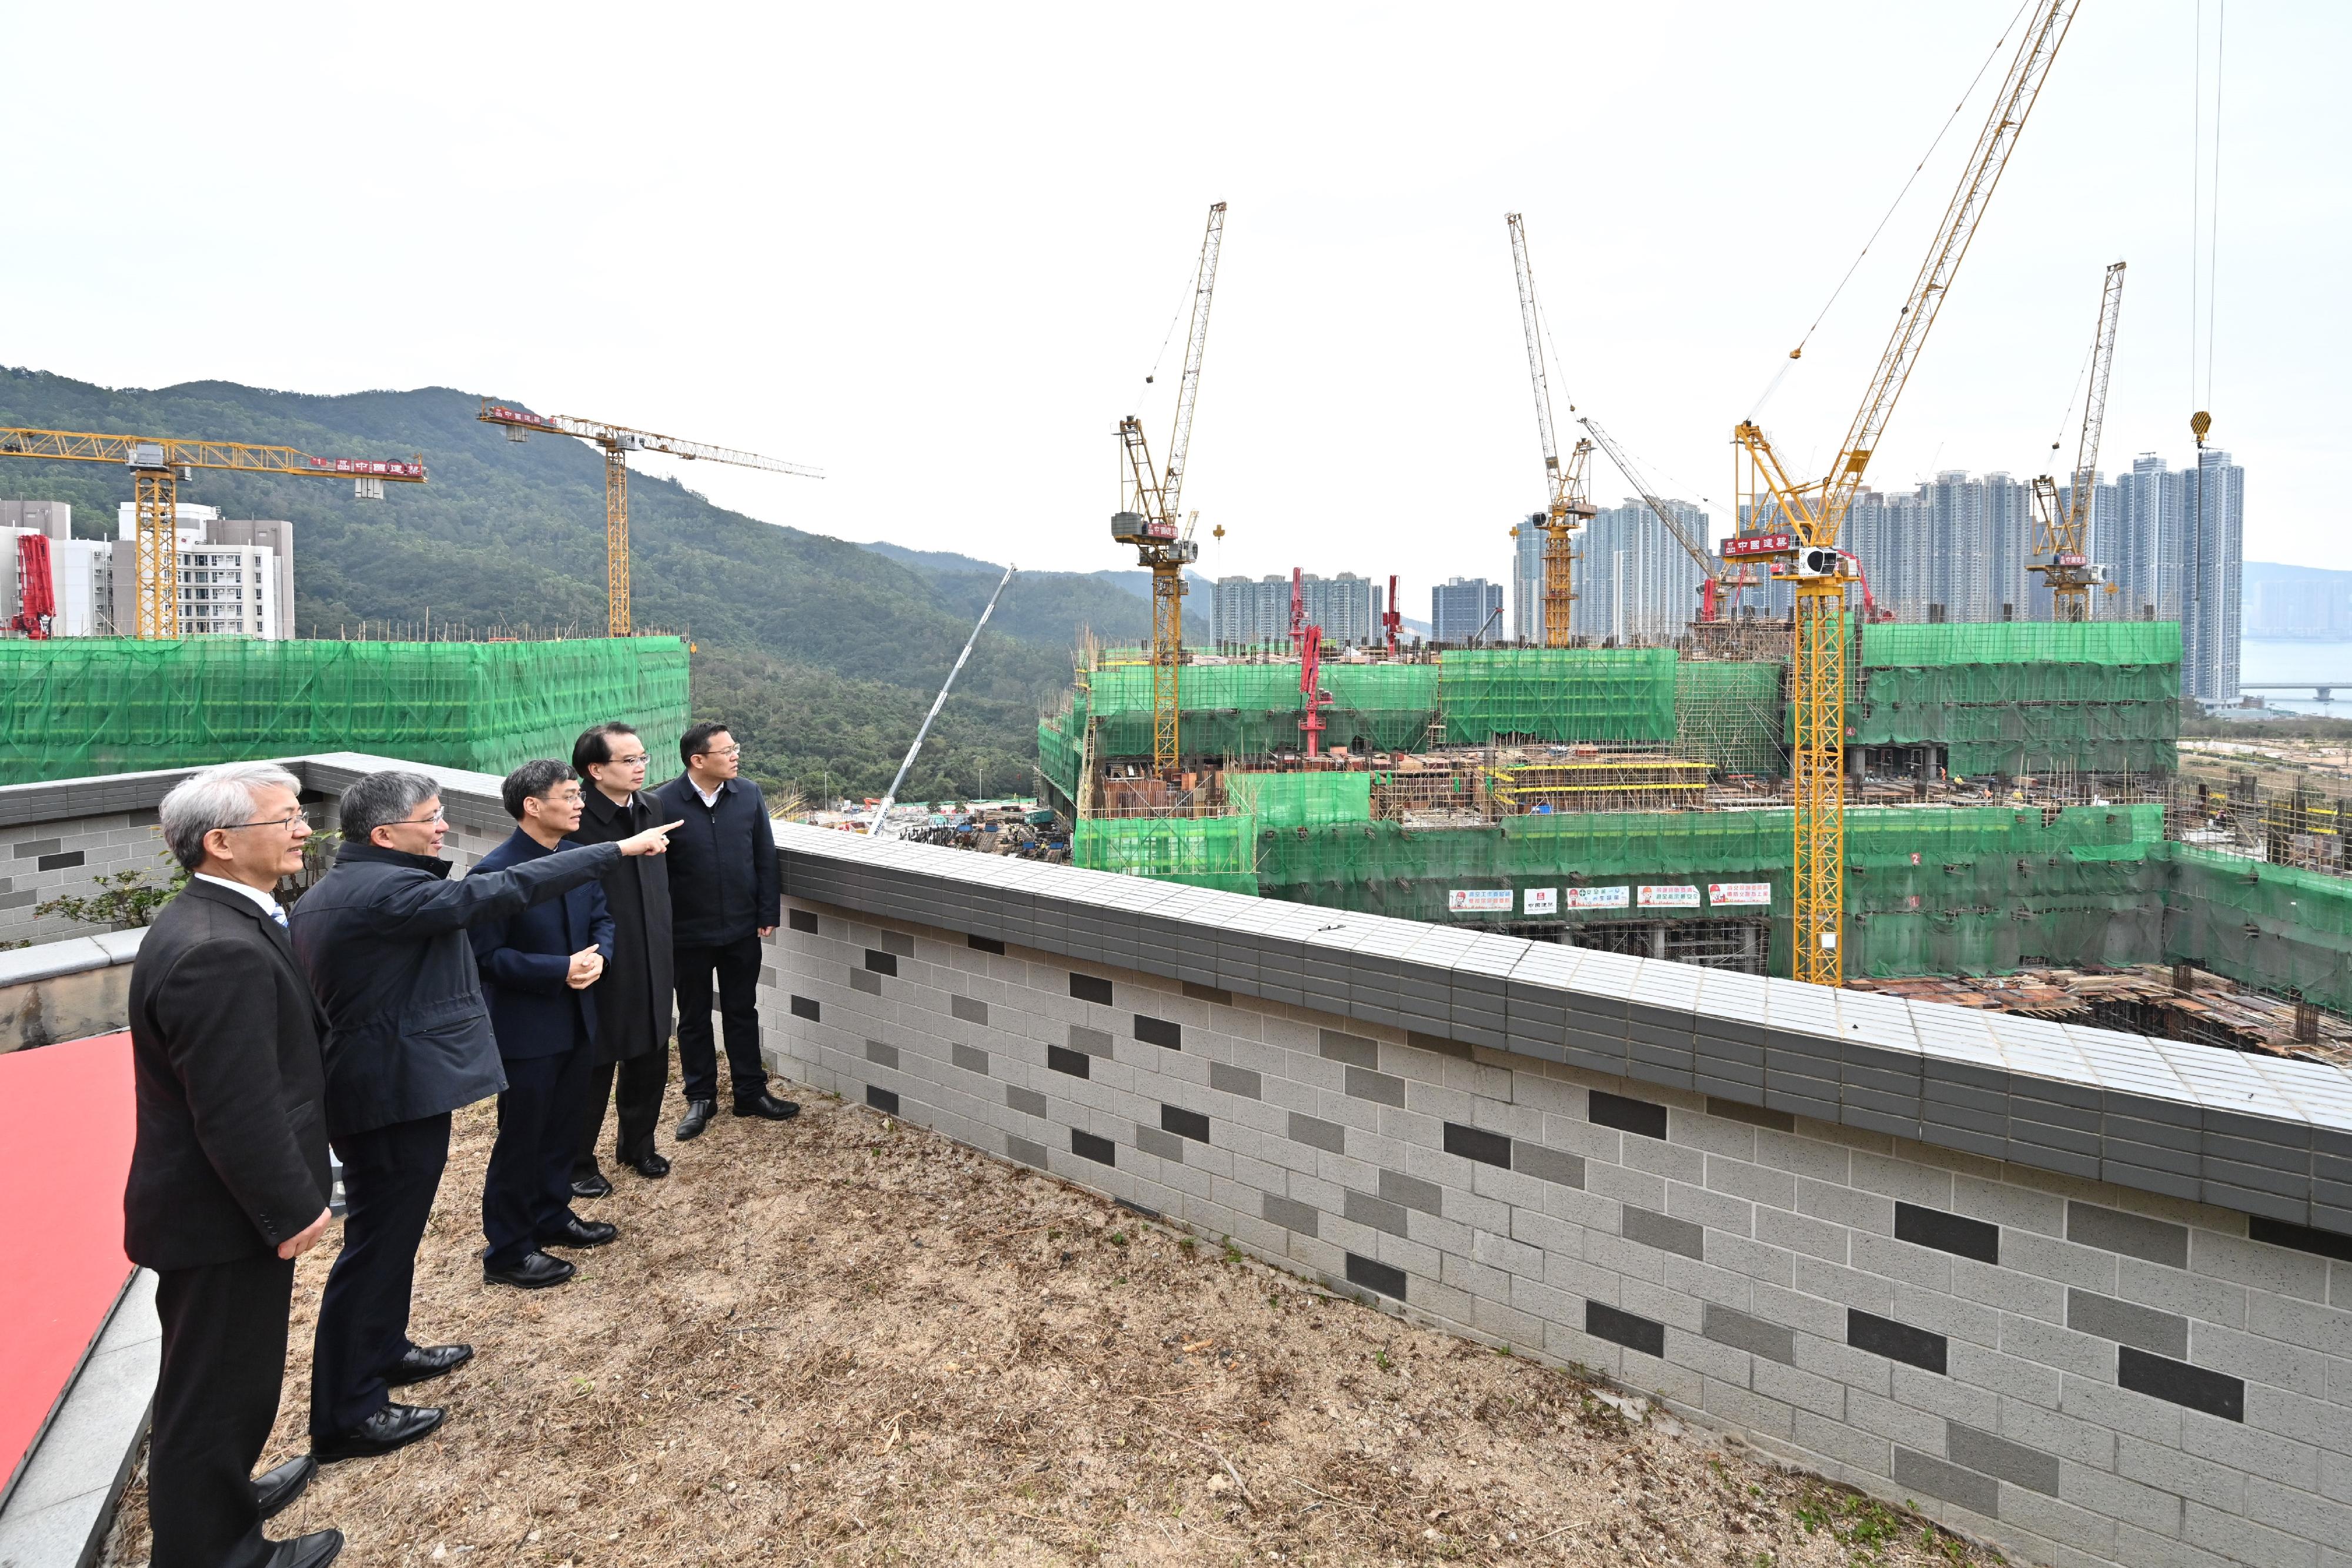 The Permanent Secretary for Health, Mr Thomas Chan (second left), and the President of the Guangdong Provincial Hospital of Traditional Chinese Medicine, Professor Zhang Zhongde (centre), have an overview of the construction site of the Chinese Medicine Hospital of Hong Kong at Pak Shing Kok, Tseung Kwan O, today (January 24) to get a better grasp of the architectural design concept and works progress. Next to them is the Project Director of the Chinese Medicine Hospital Project Office, Dr Cheung Wai-lun (second right).